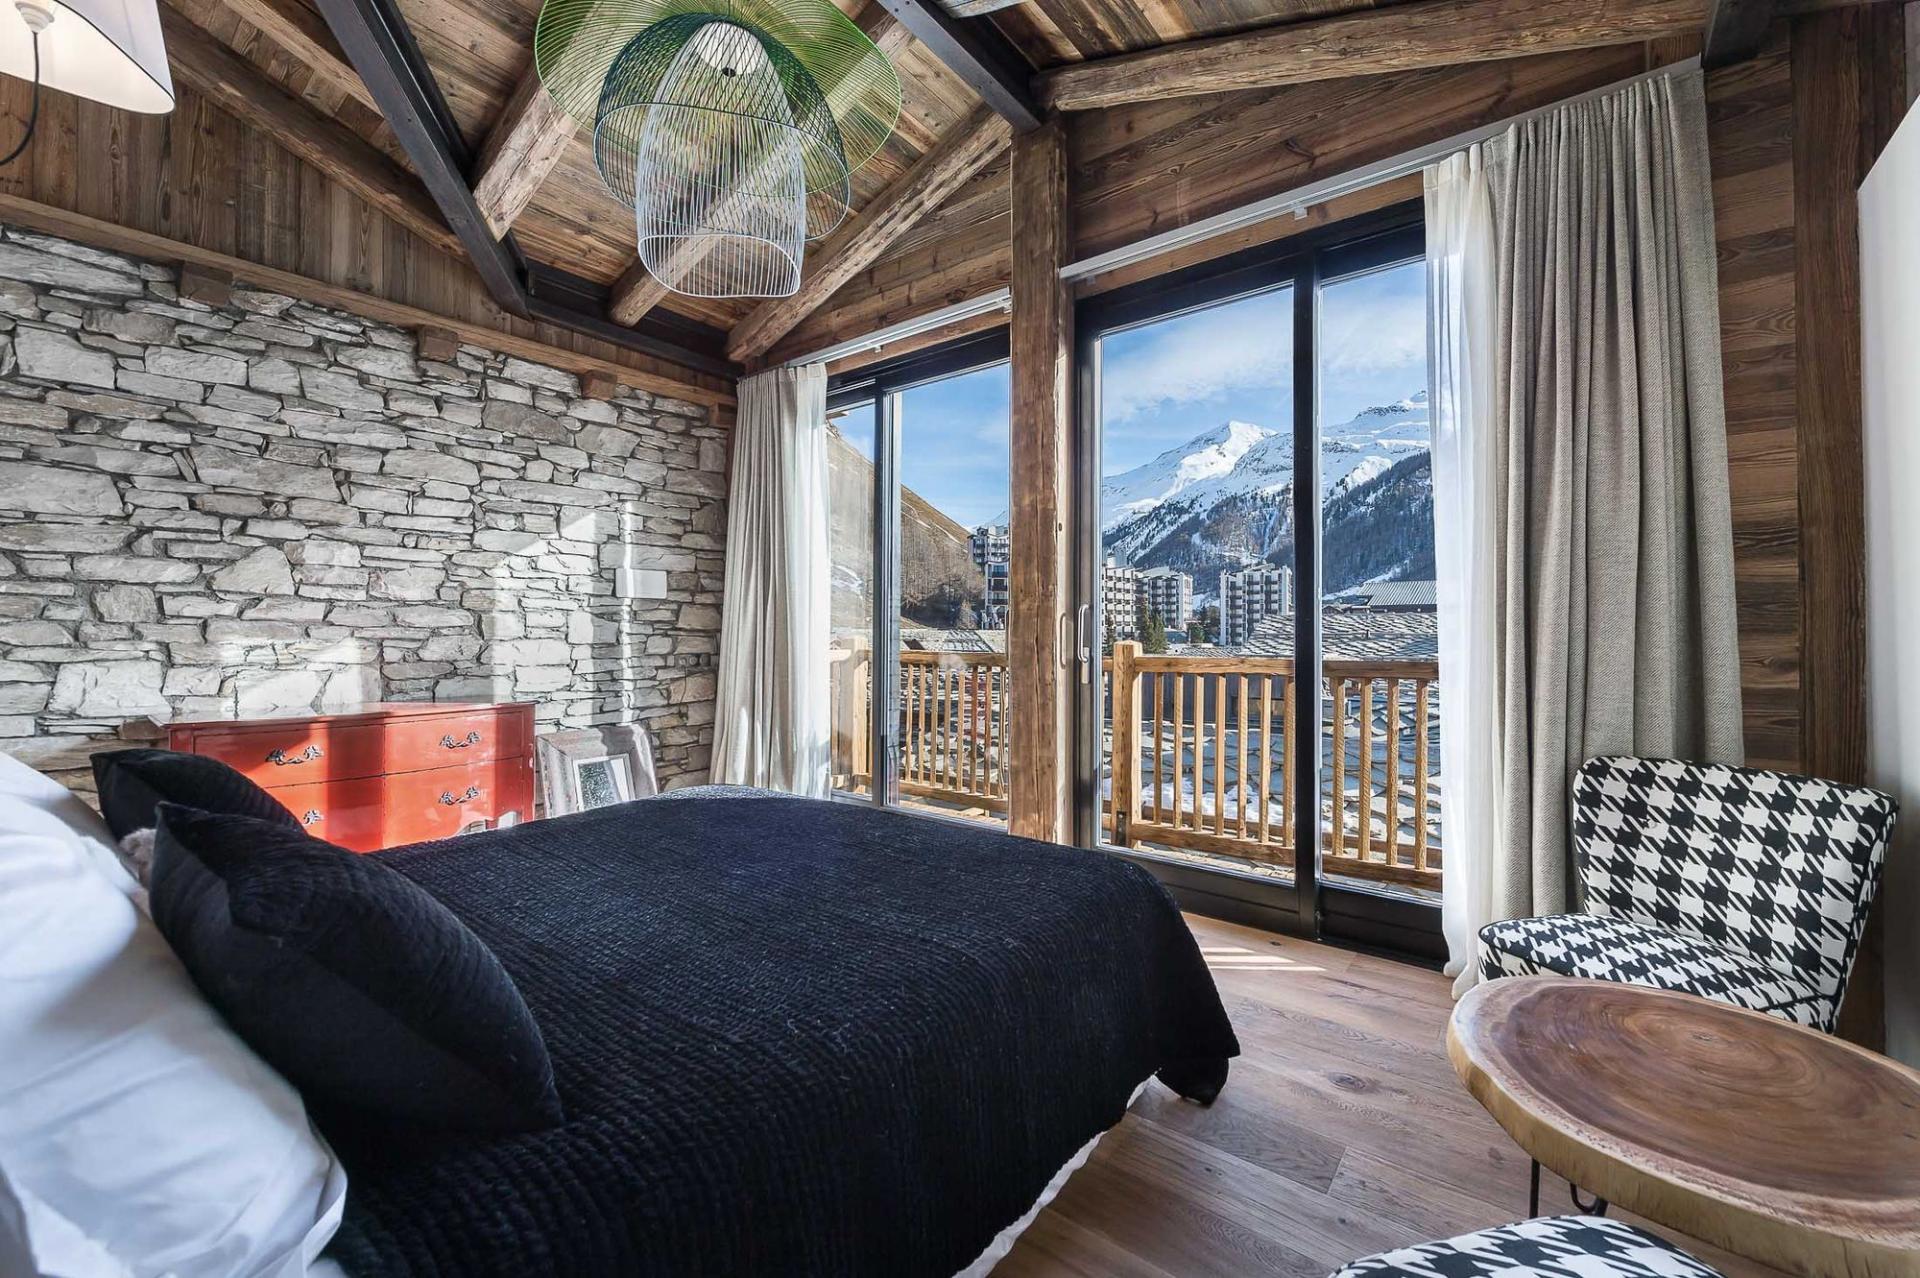 AMAZING VIEWS FOR THIS BEDROOM IN THE PENTHOUSE APARTMENT IN THE FRENCH ALPS